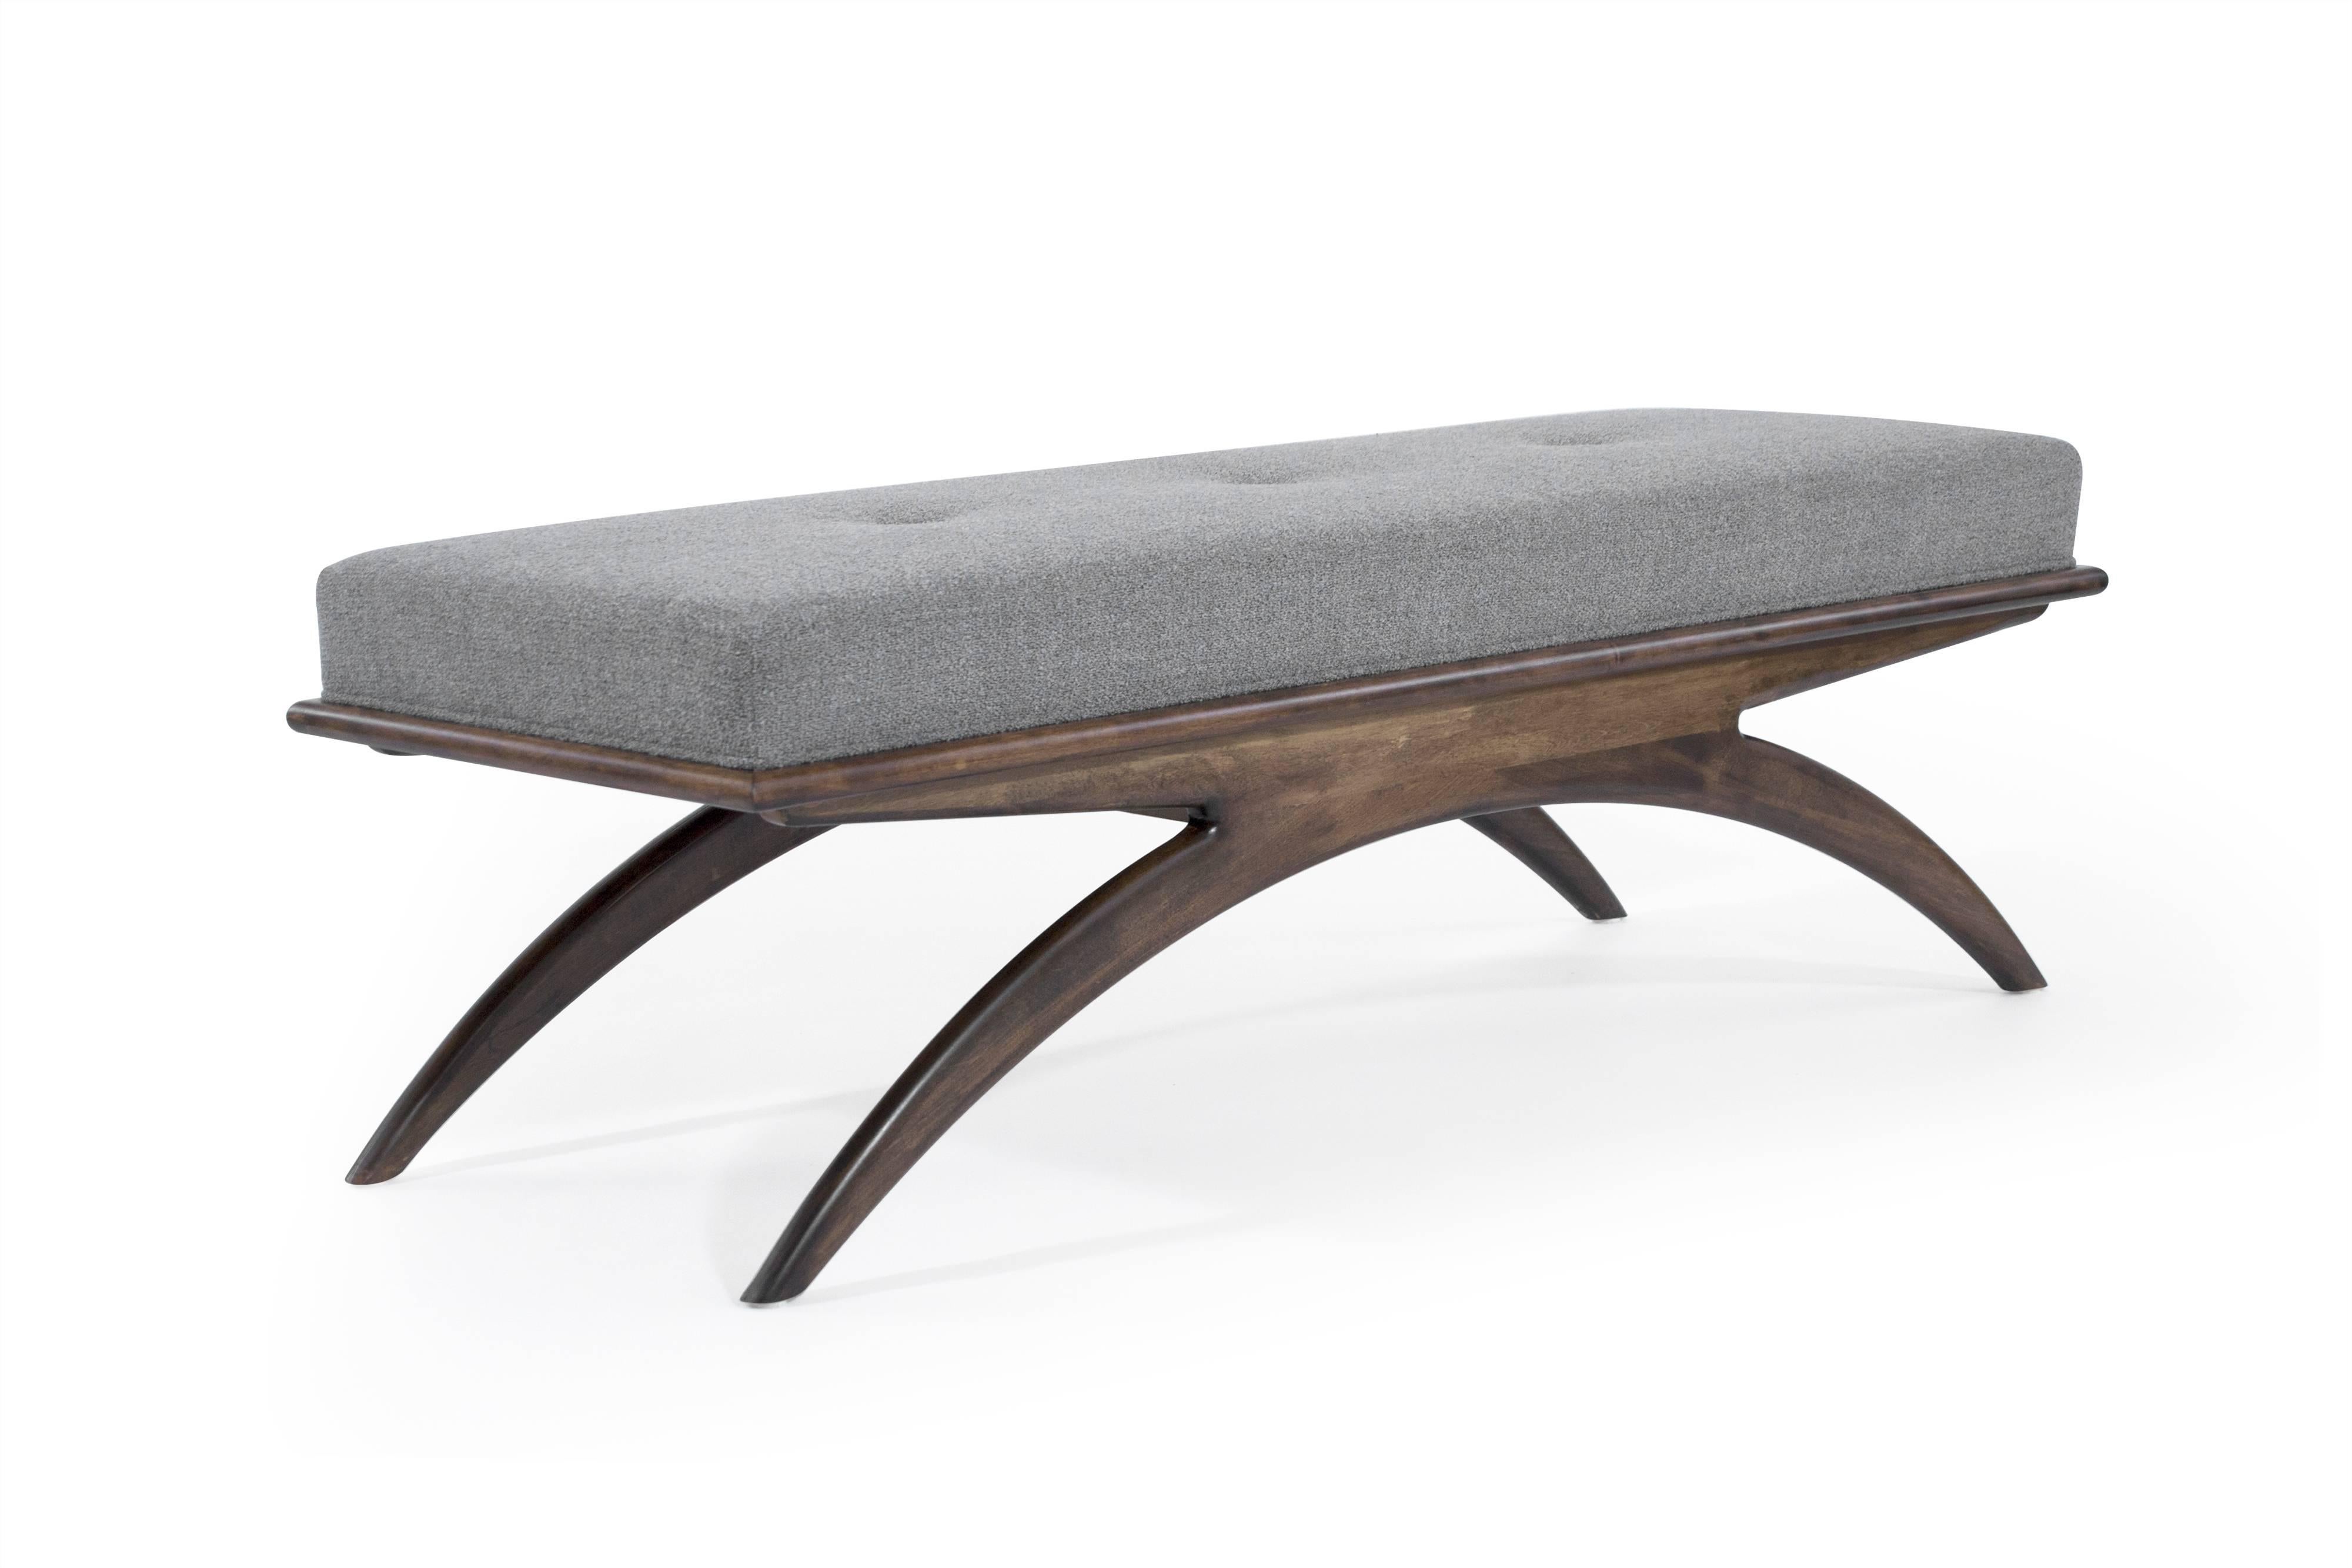 Artistically handcrafted from solid walnut featuring tapered arched legs underneath an upholstered top. The design is largely inspired by iconic Italian furniture designer Gio Ponti. We are proud to mimic his tradition of making pieces that are